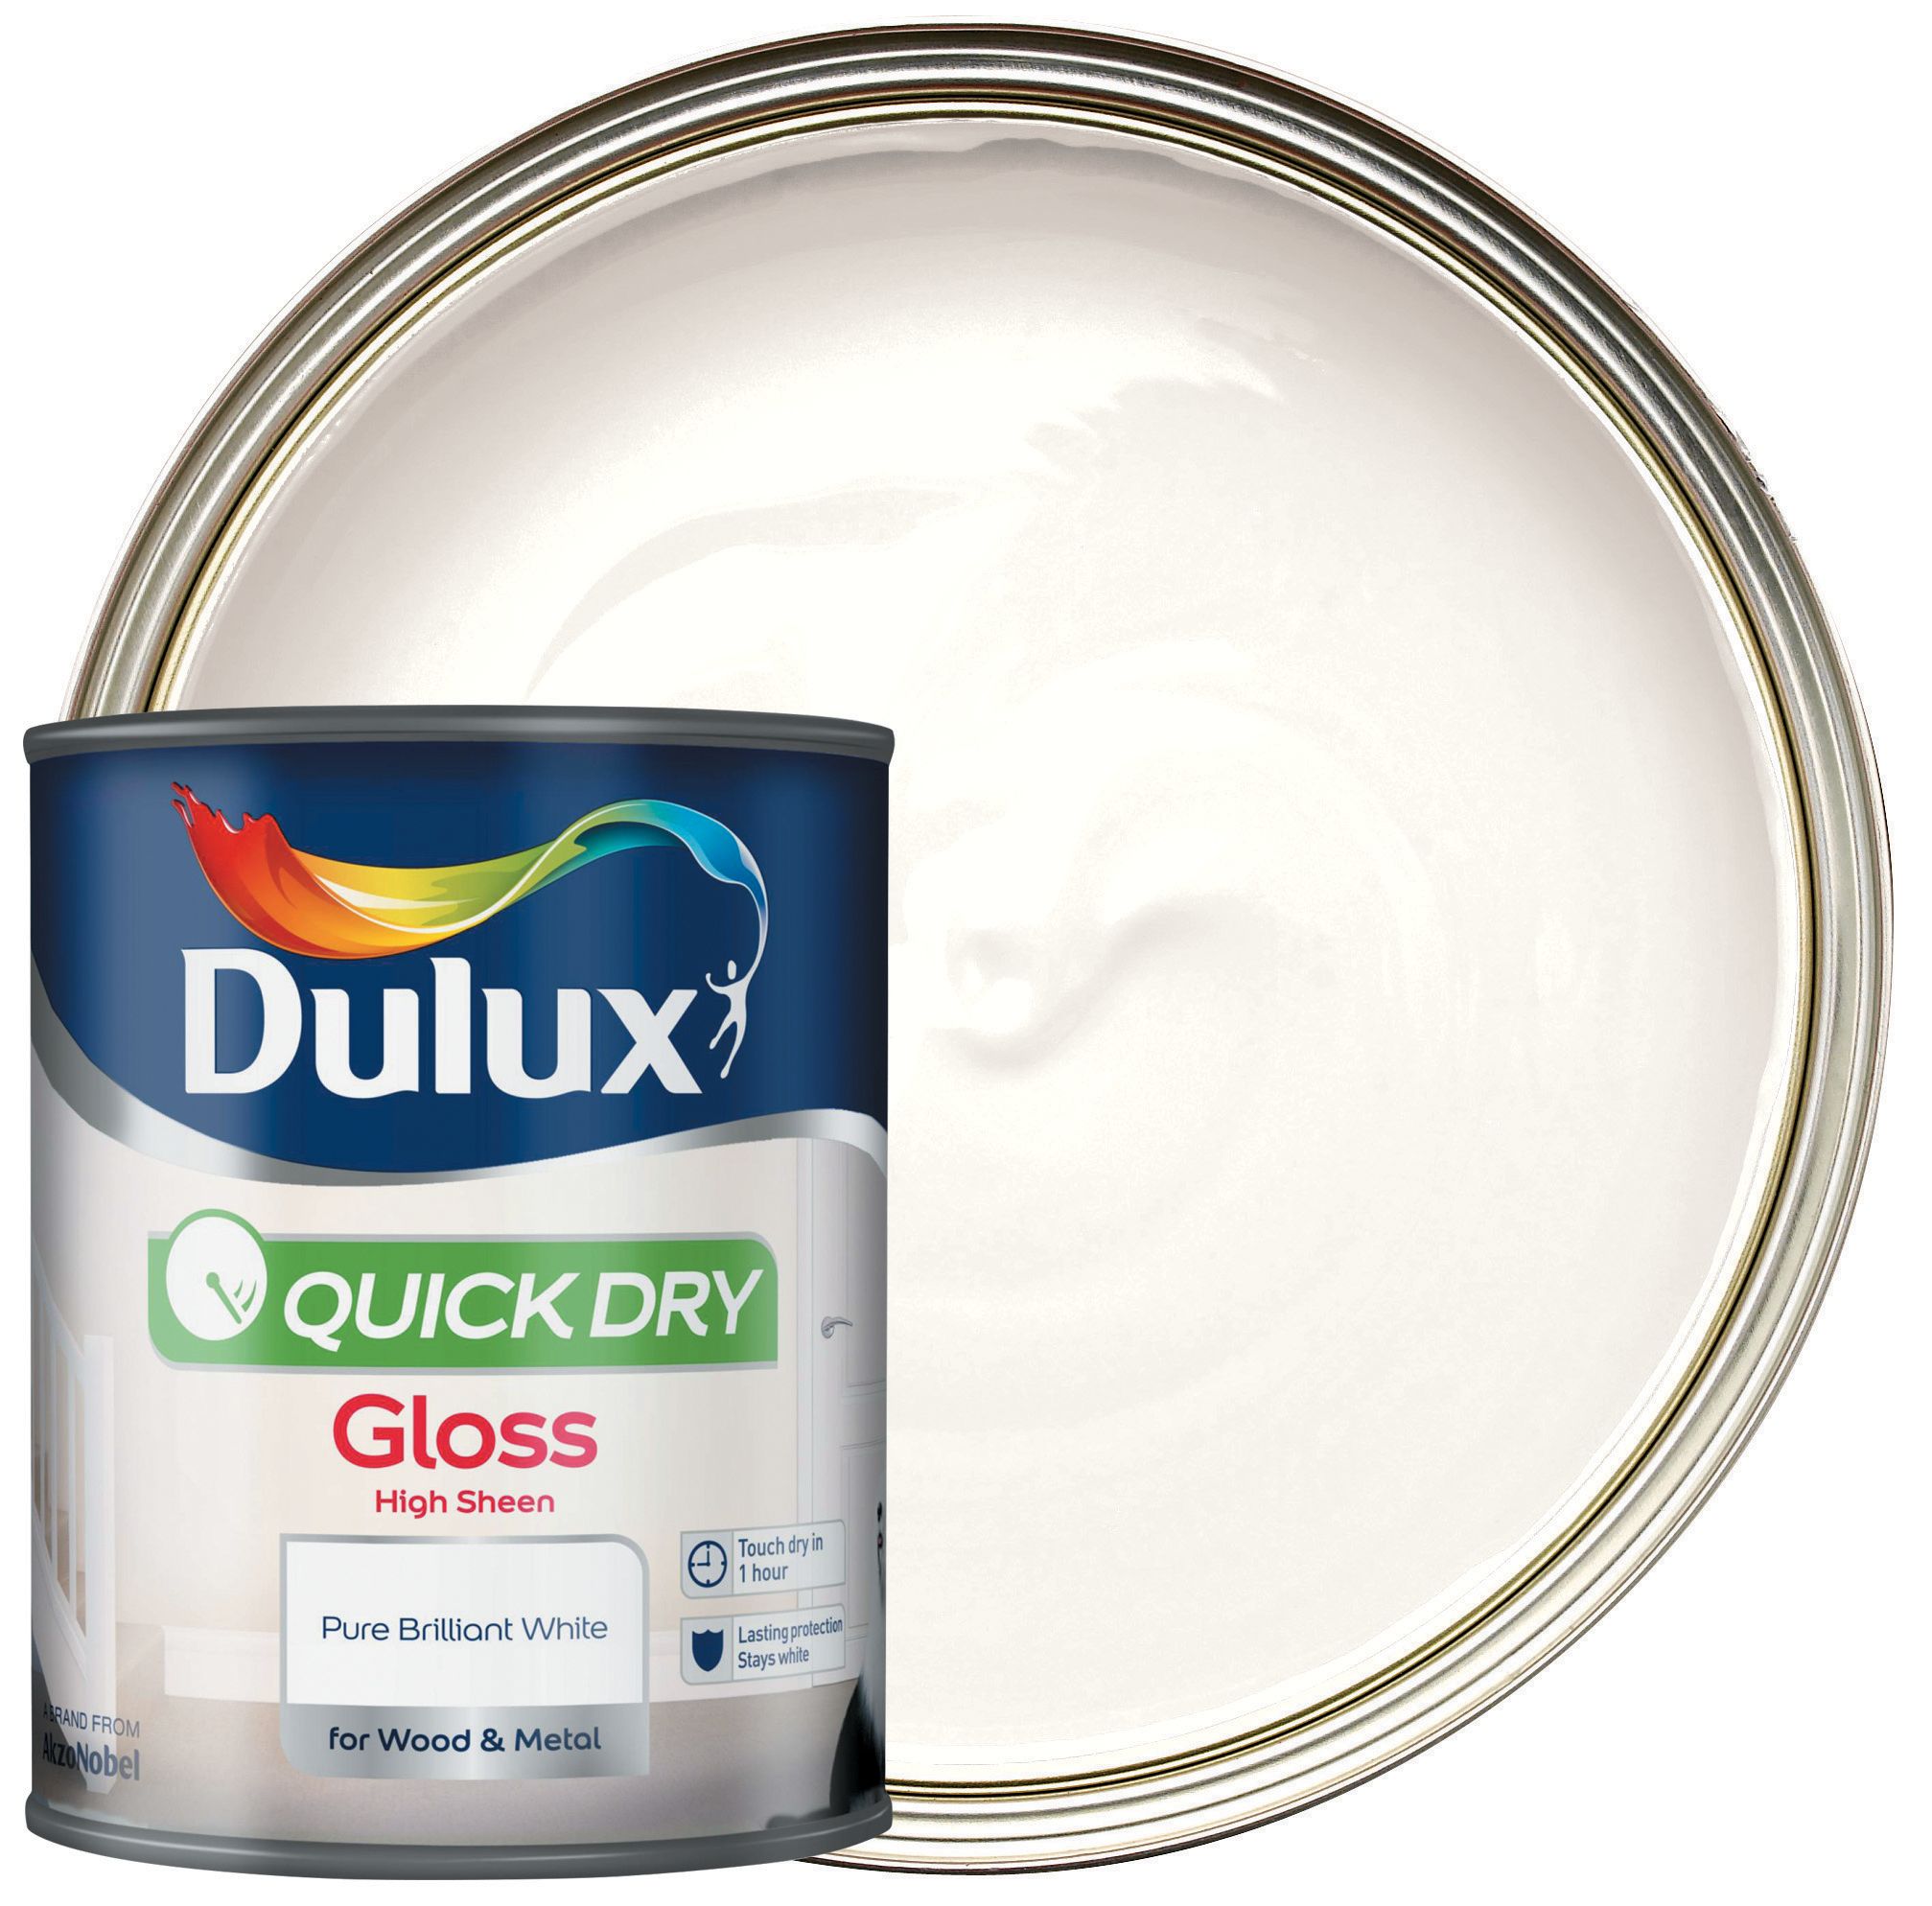 Image of Dulux Quick Dry Gloss Paint - Paint Pure Brilliant White - 750ml